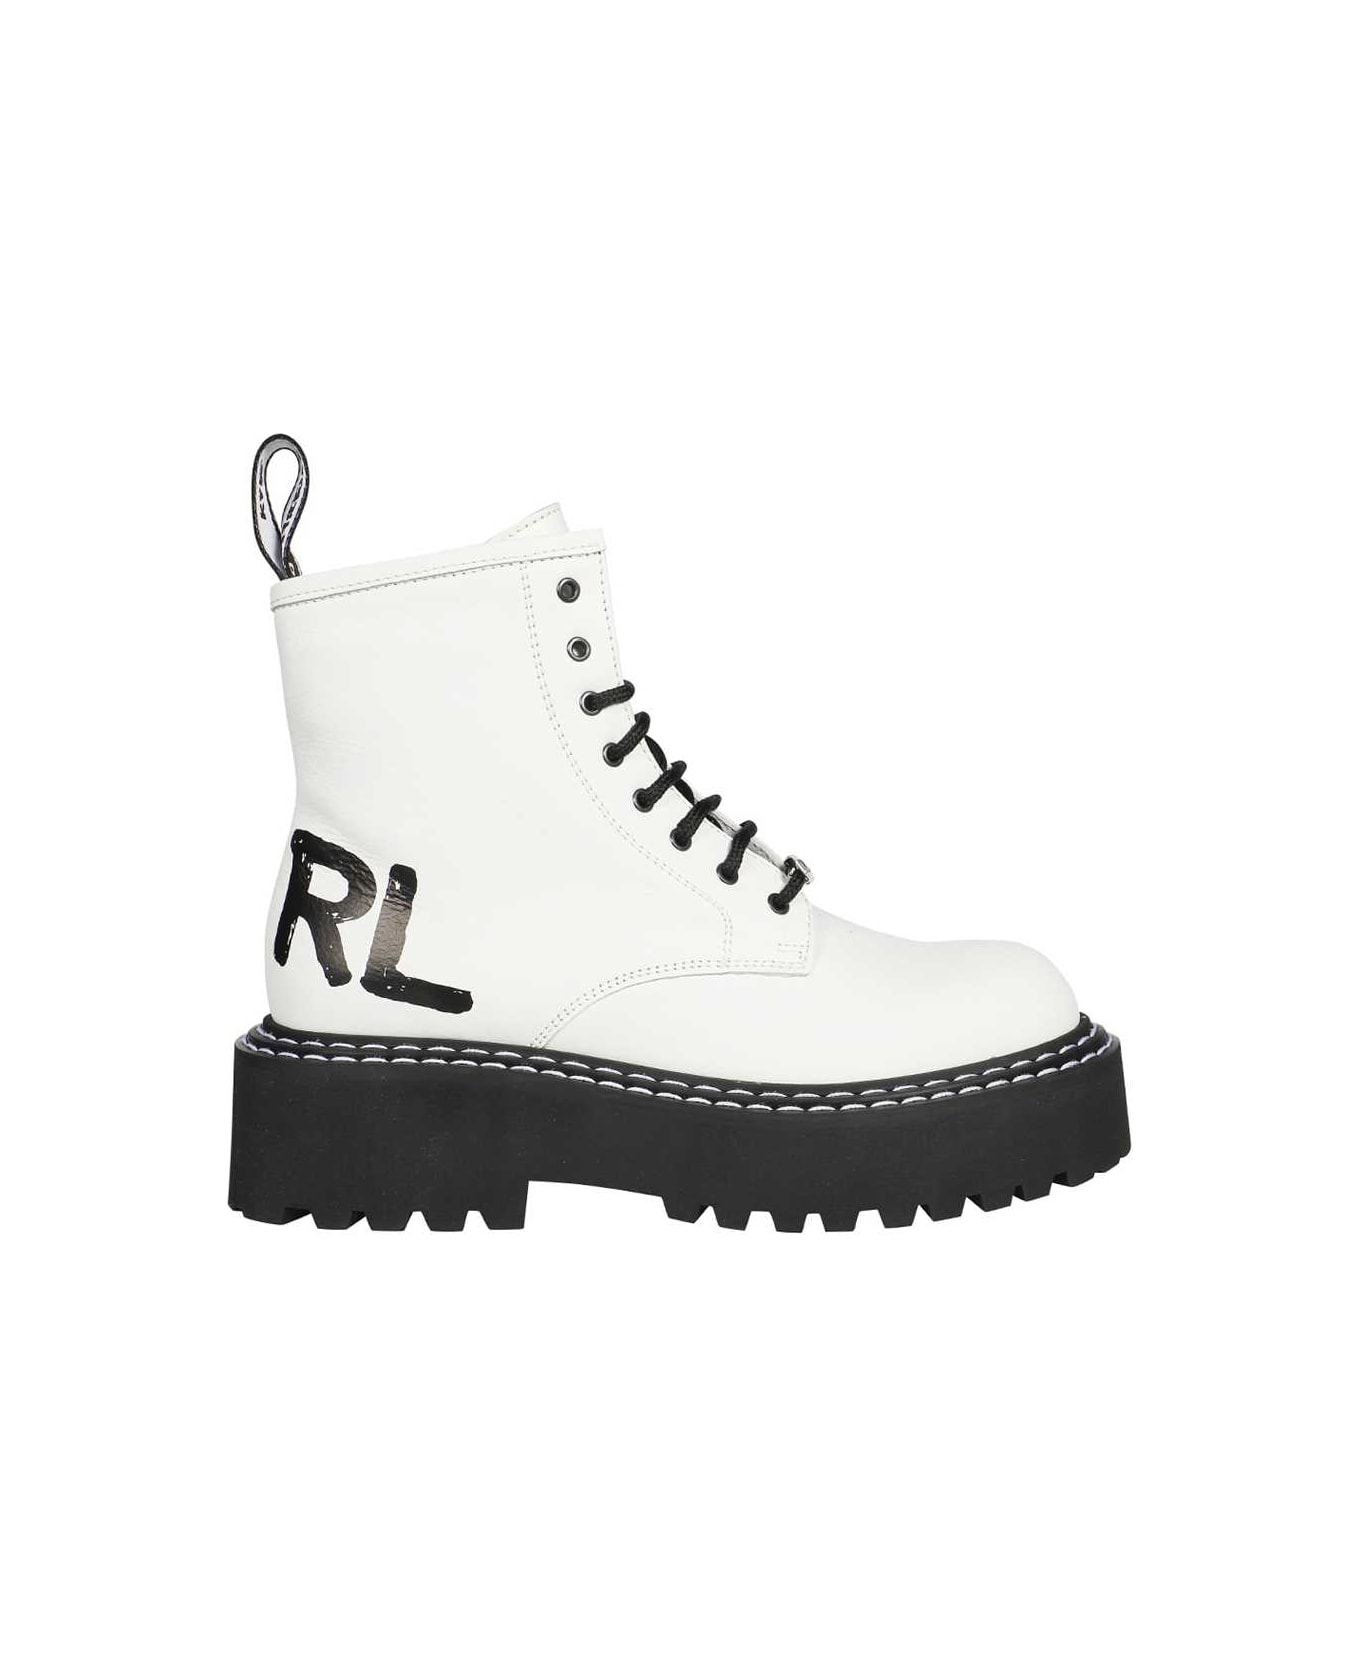 Karl Lagerfeld Lace-up Ankle Boots - White ブーツ